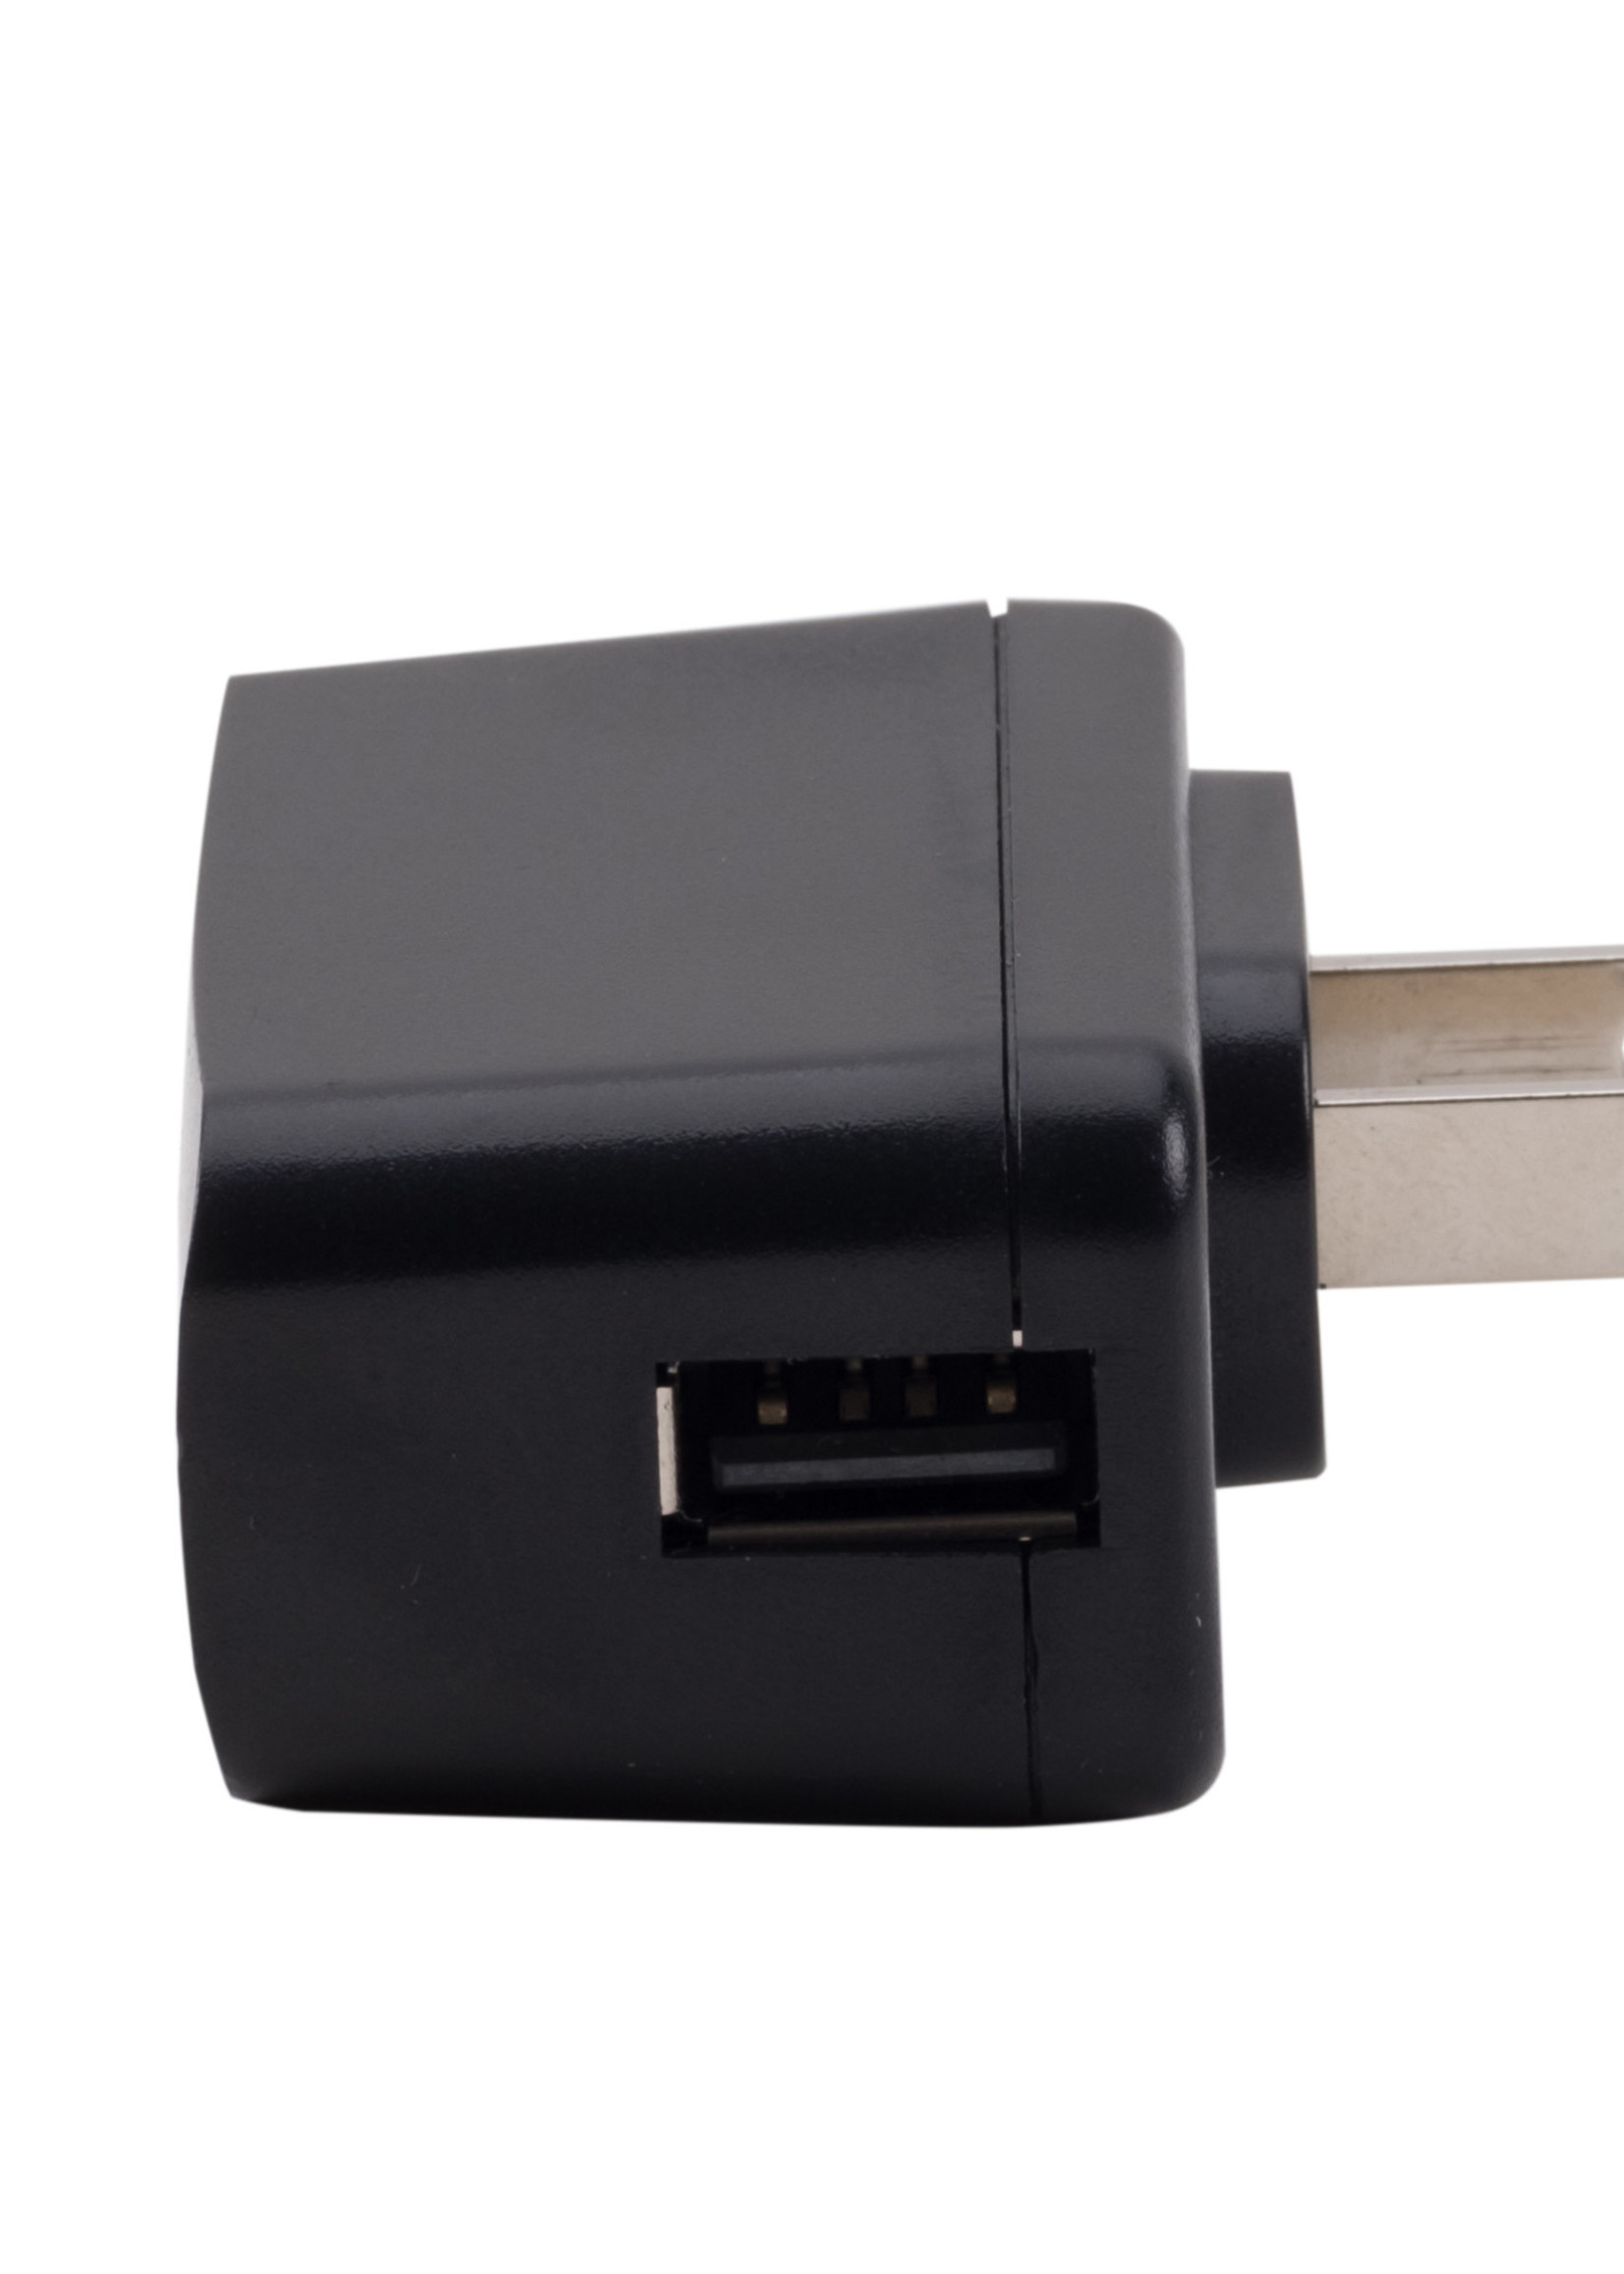 Catit® Replacement USB Adapter ONLY for Cat Drinking Fountains (55600, 50761, 43742, 43735)